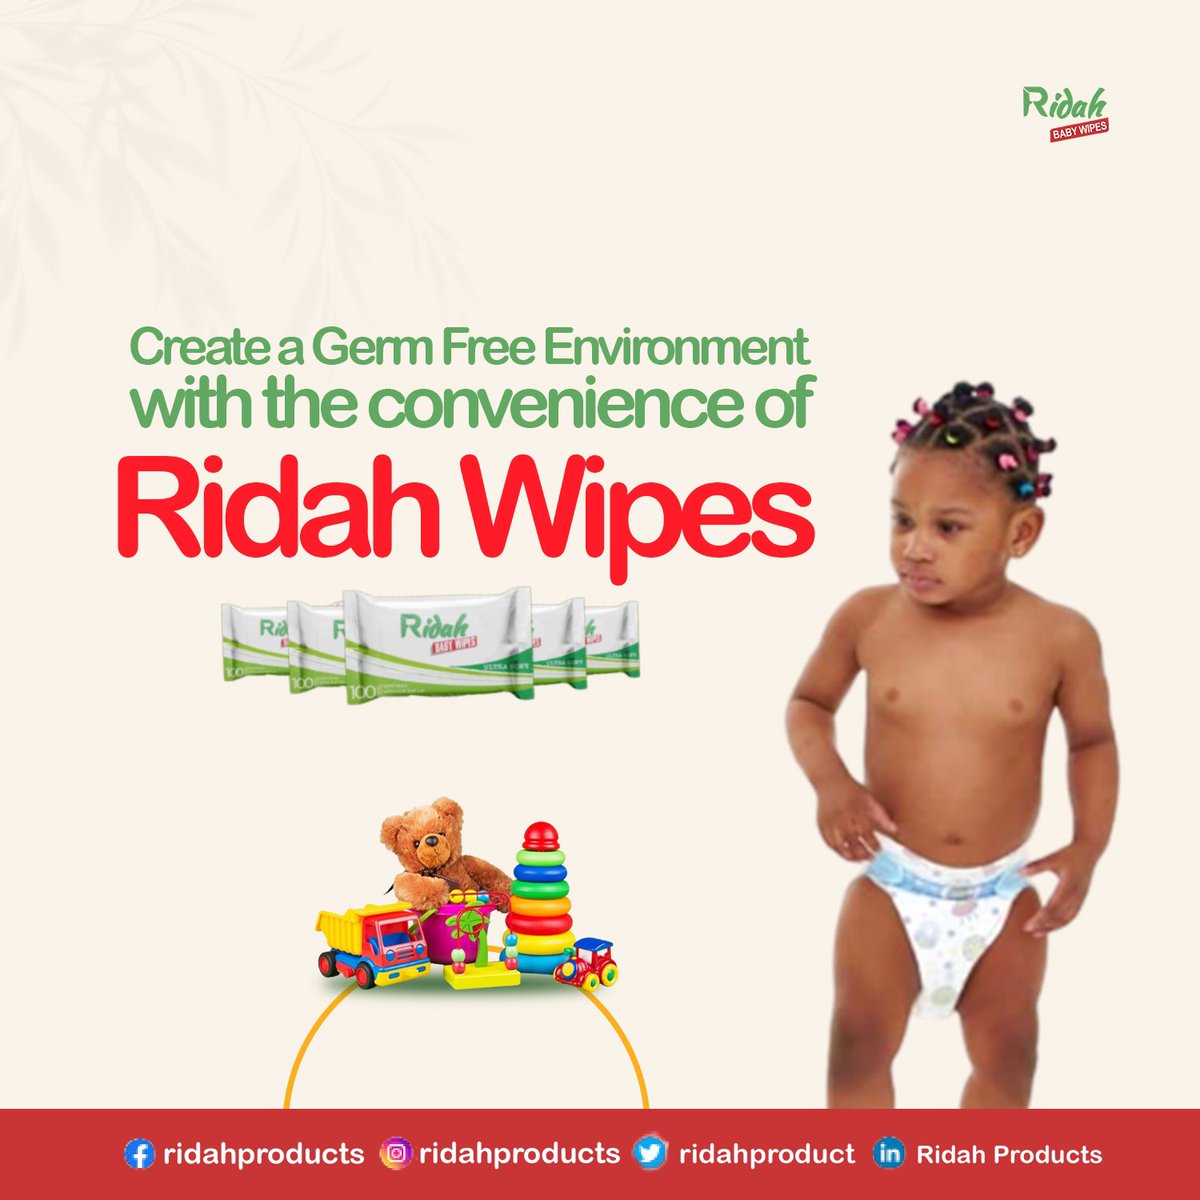 Clean environment = a healthy baby 

Our baby wipes are formulated with 💯 Plant based ingredients that keeps your babies bacteria free 

#ridahbabywipes #babywipes #wetwipes #babies #gemfree #nobacteria #healthybaby #cleanenvironment #